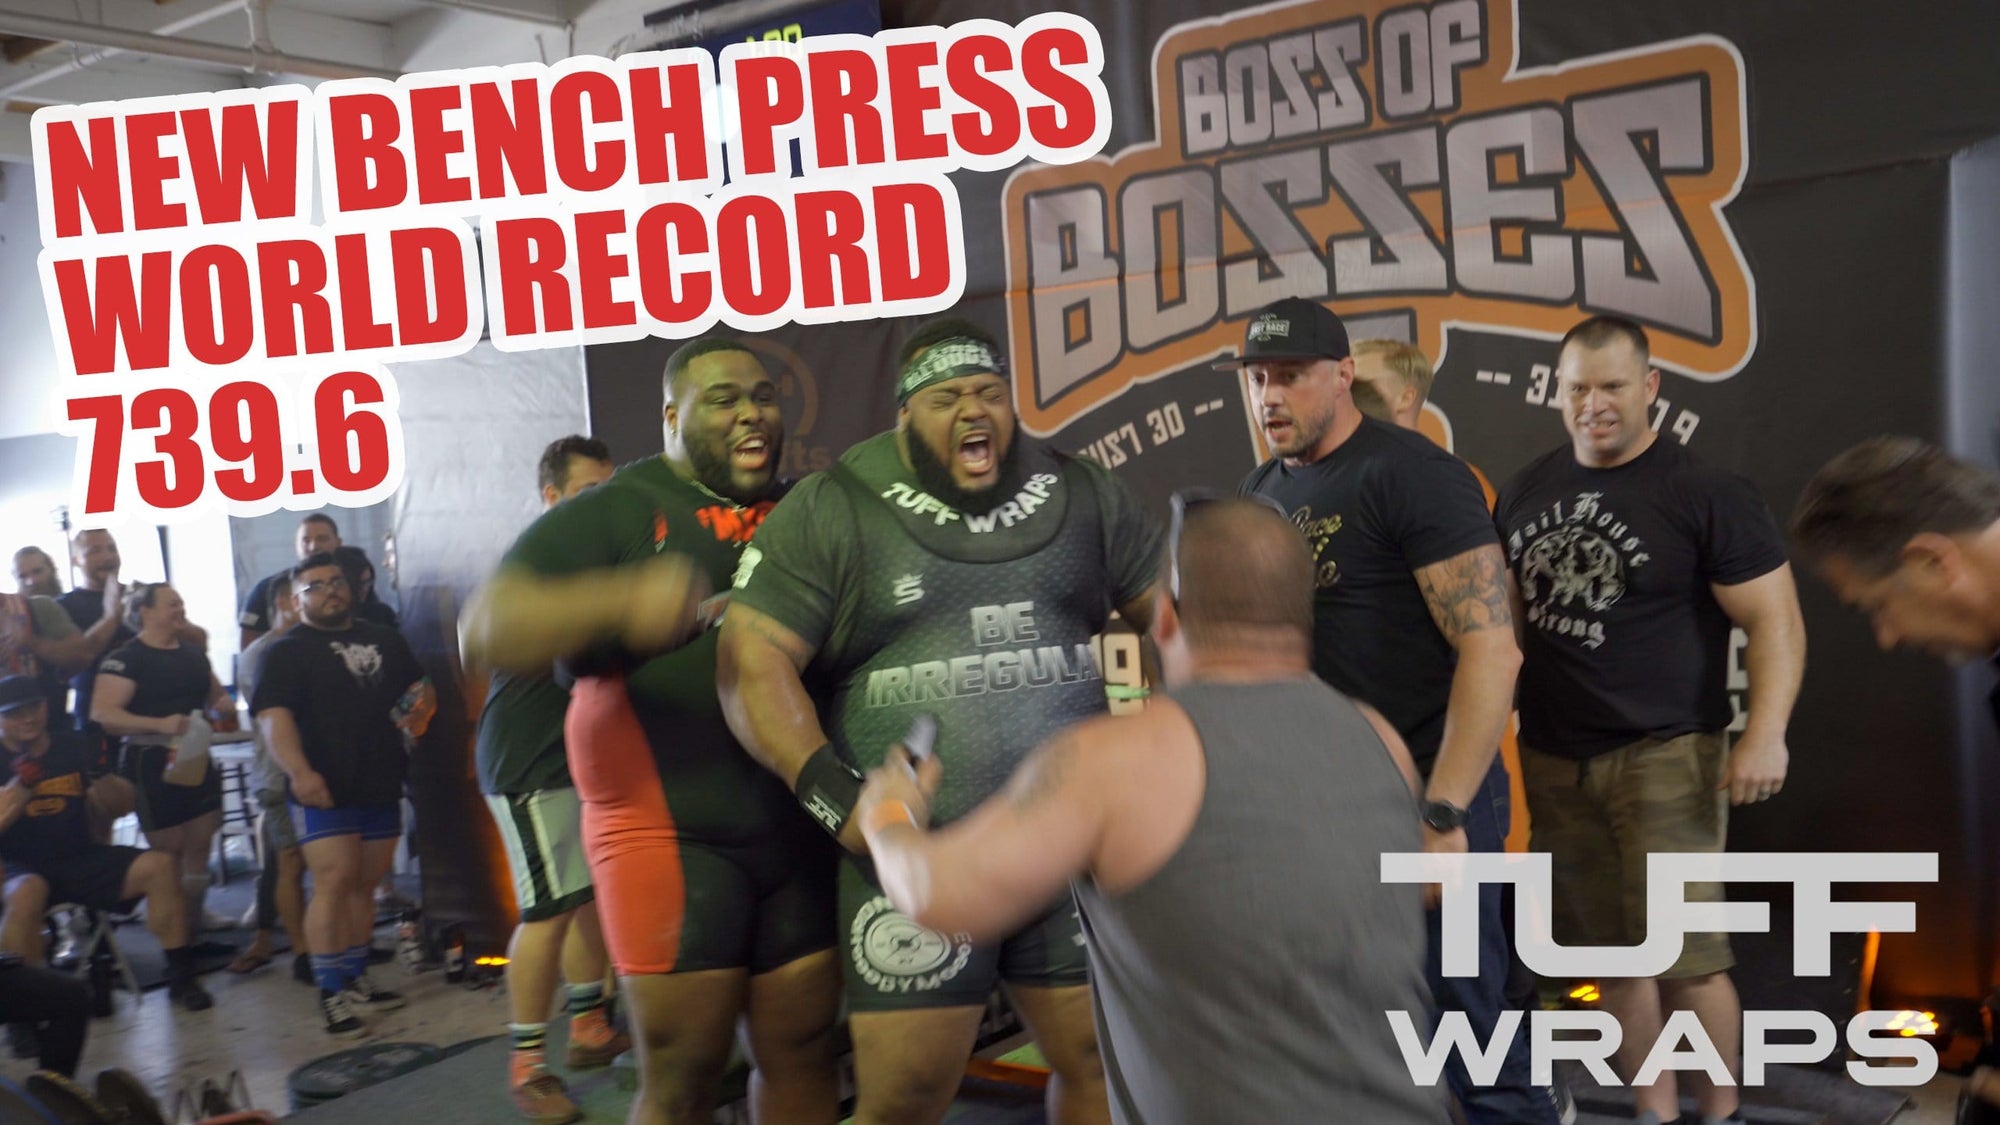 VIDEO: Julius Maddox is Now The World Bench Press Record Holder (739.6 lbs / 335.5kg)